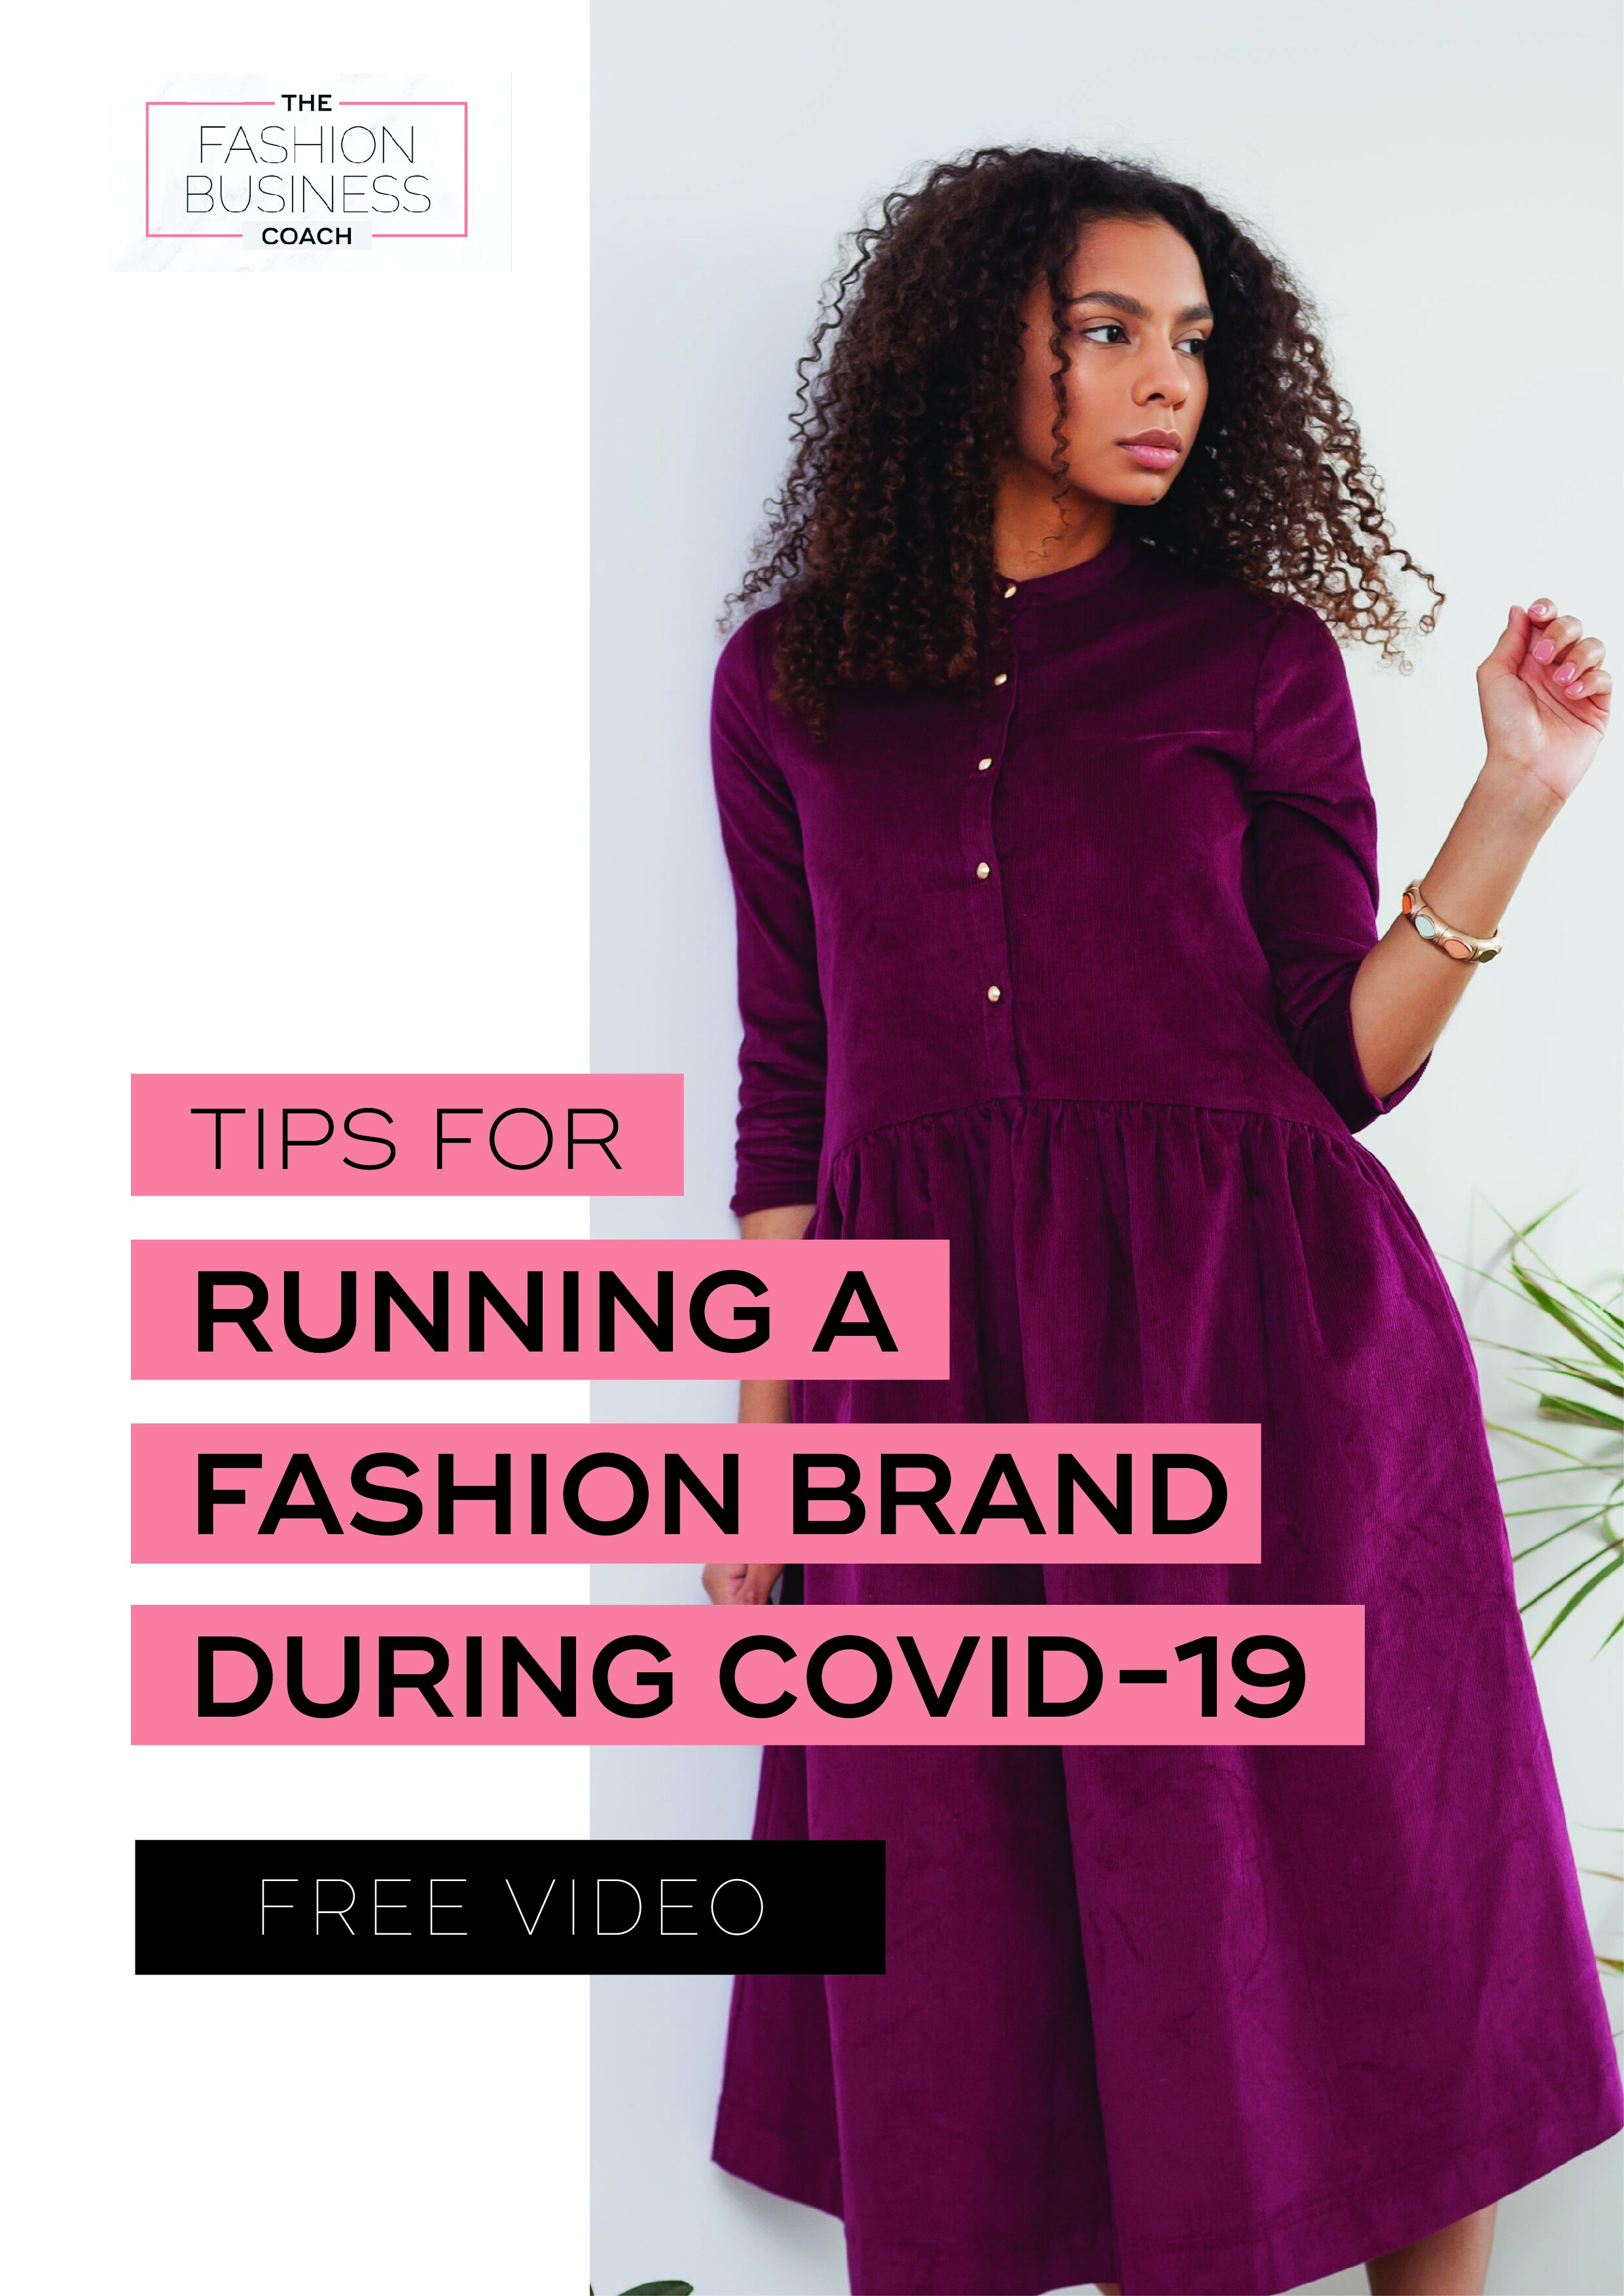 Growing a Fashion Brand During Covid-19 — The Fashion Business Coach